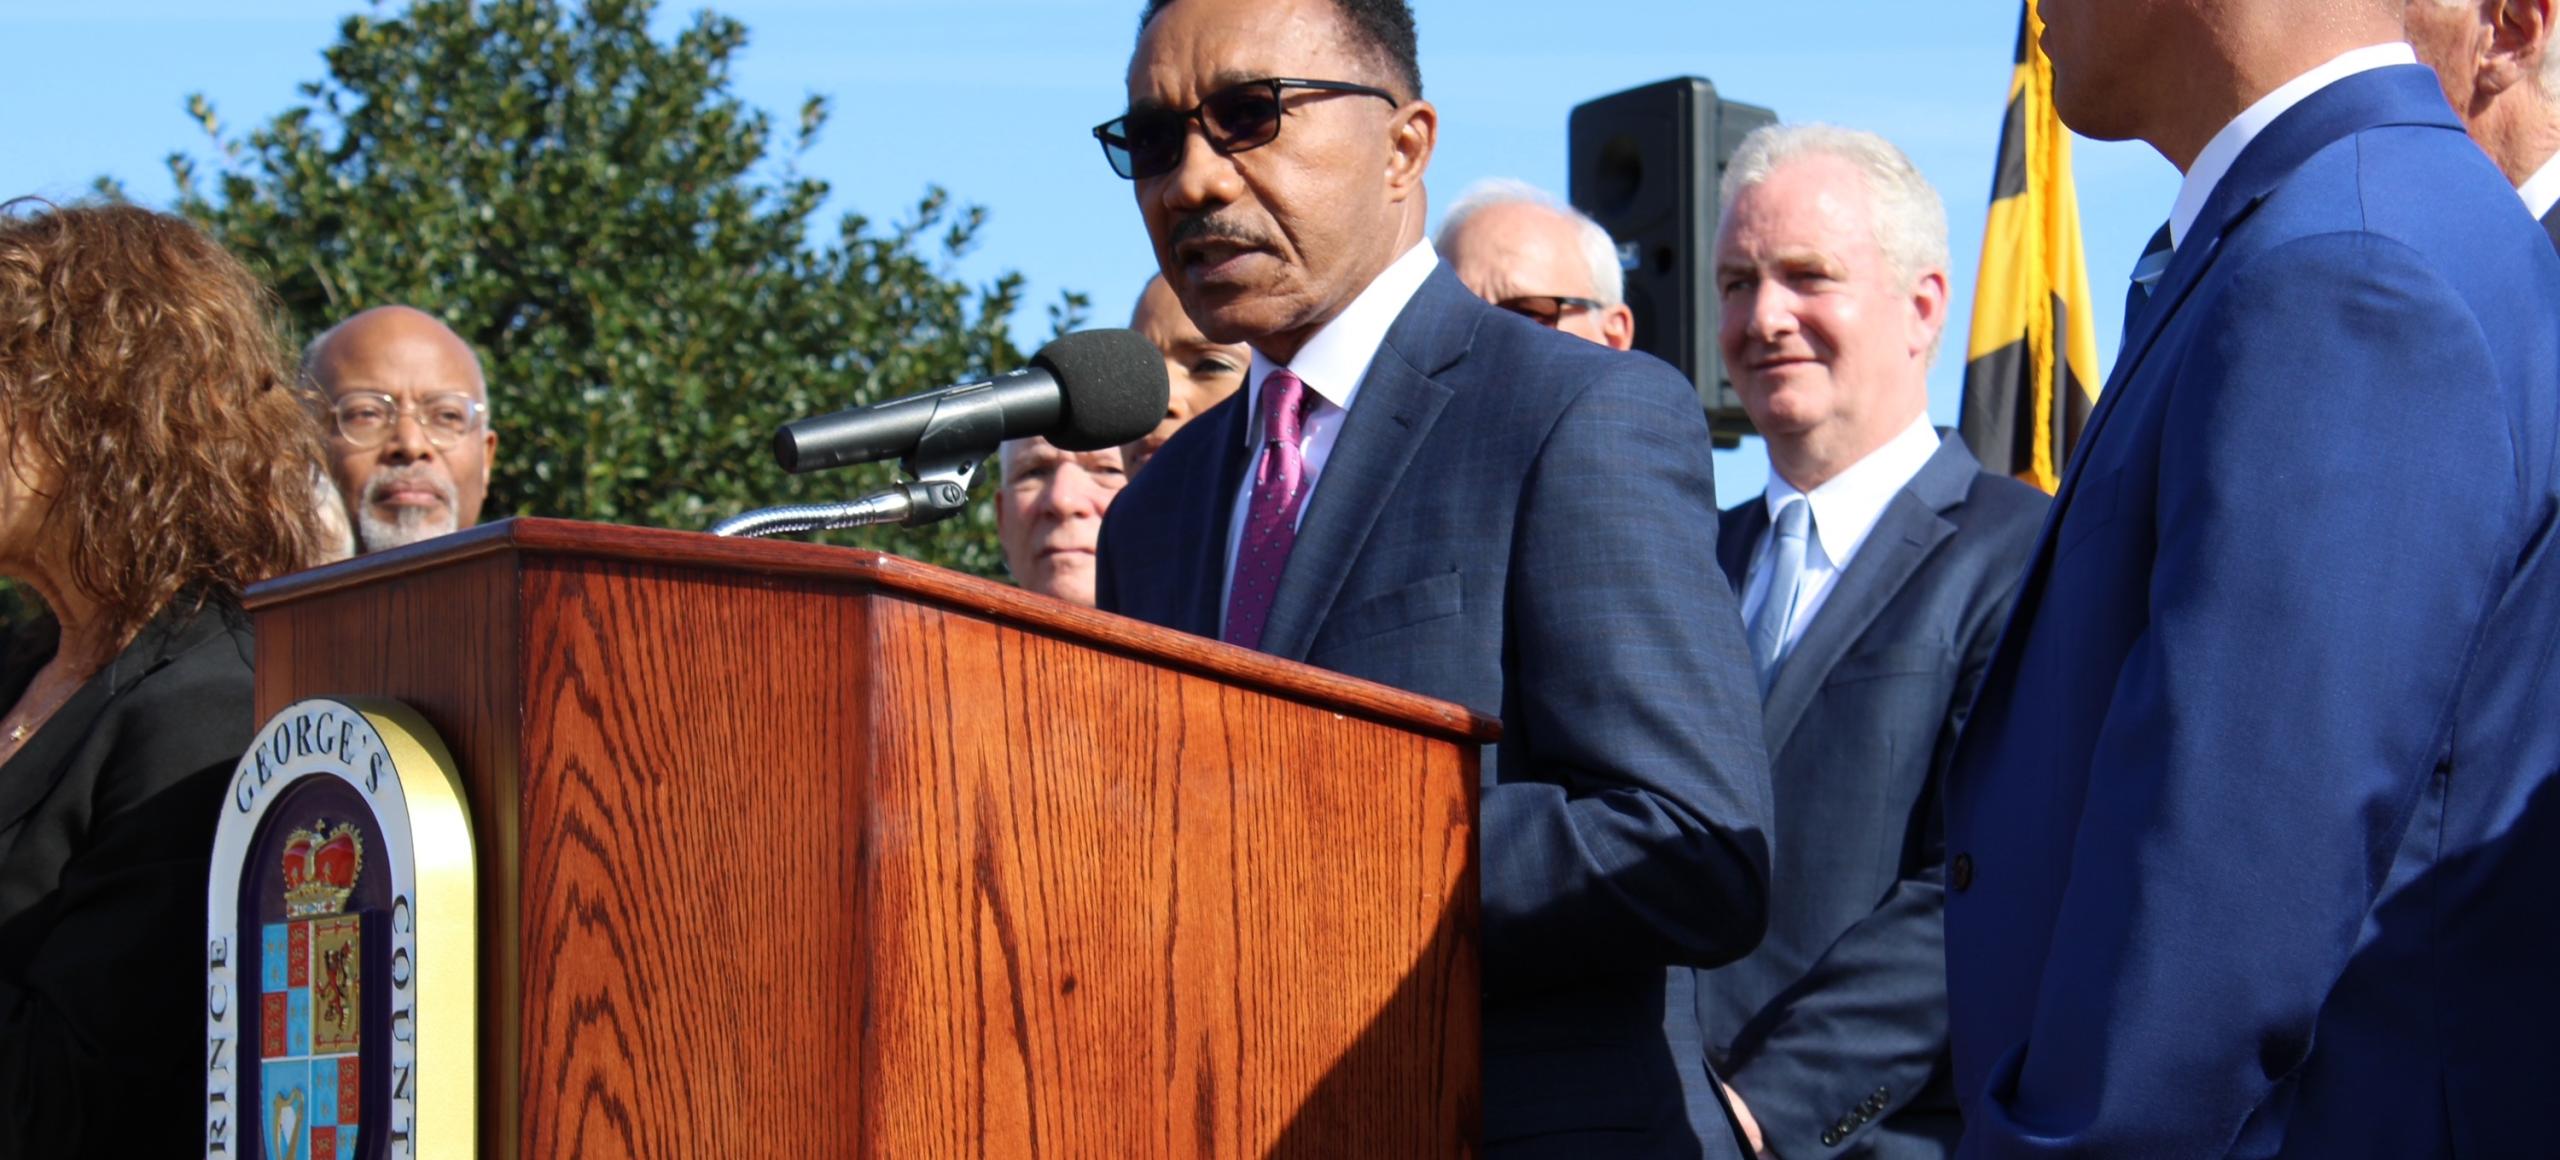 Congressman Mfume Urges FBI Headquarters be Relocated to Prince George's County